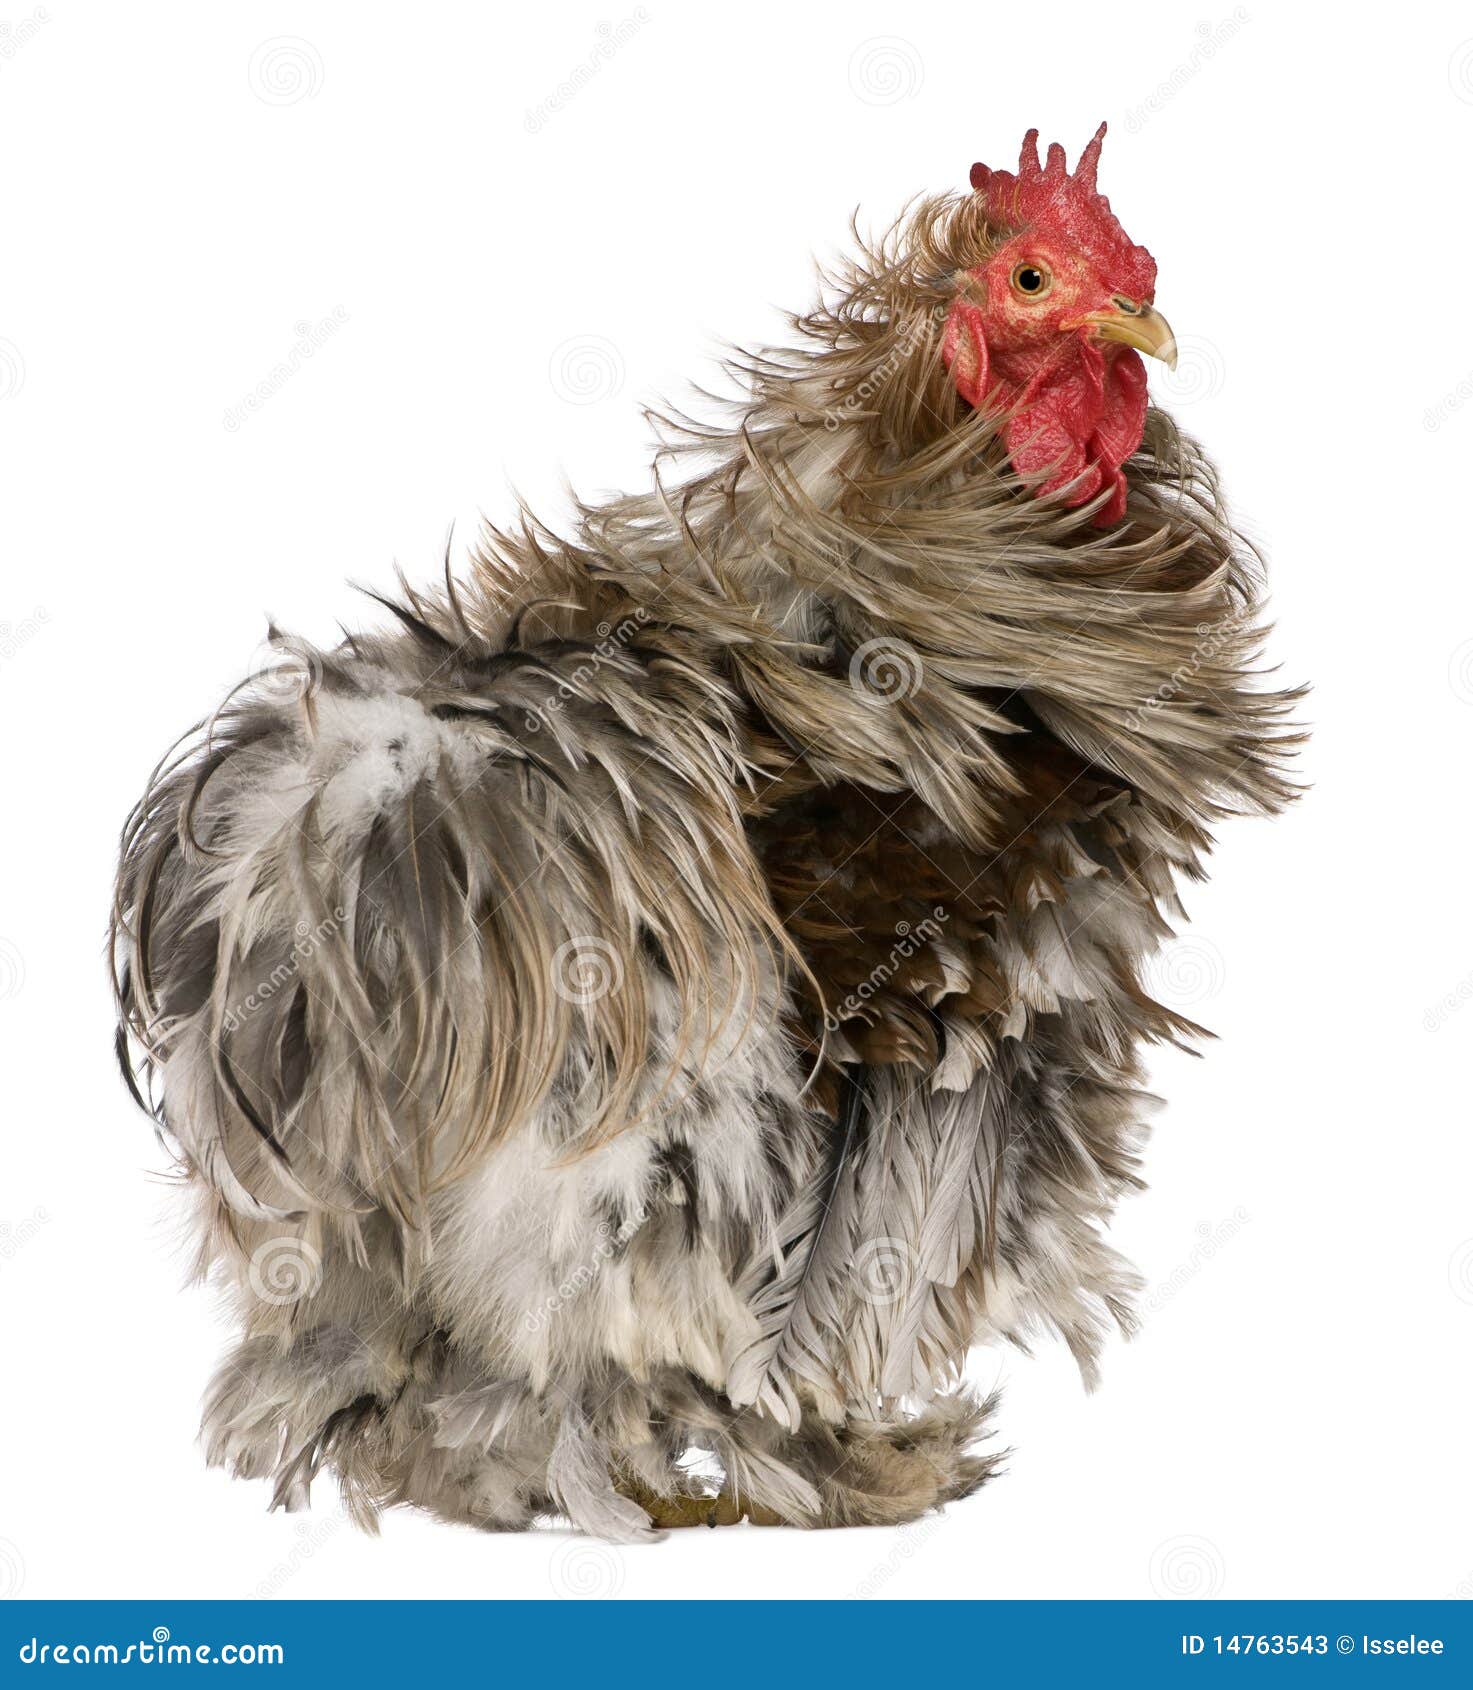 curly feathered rooster pekin, 1 years old